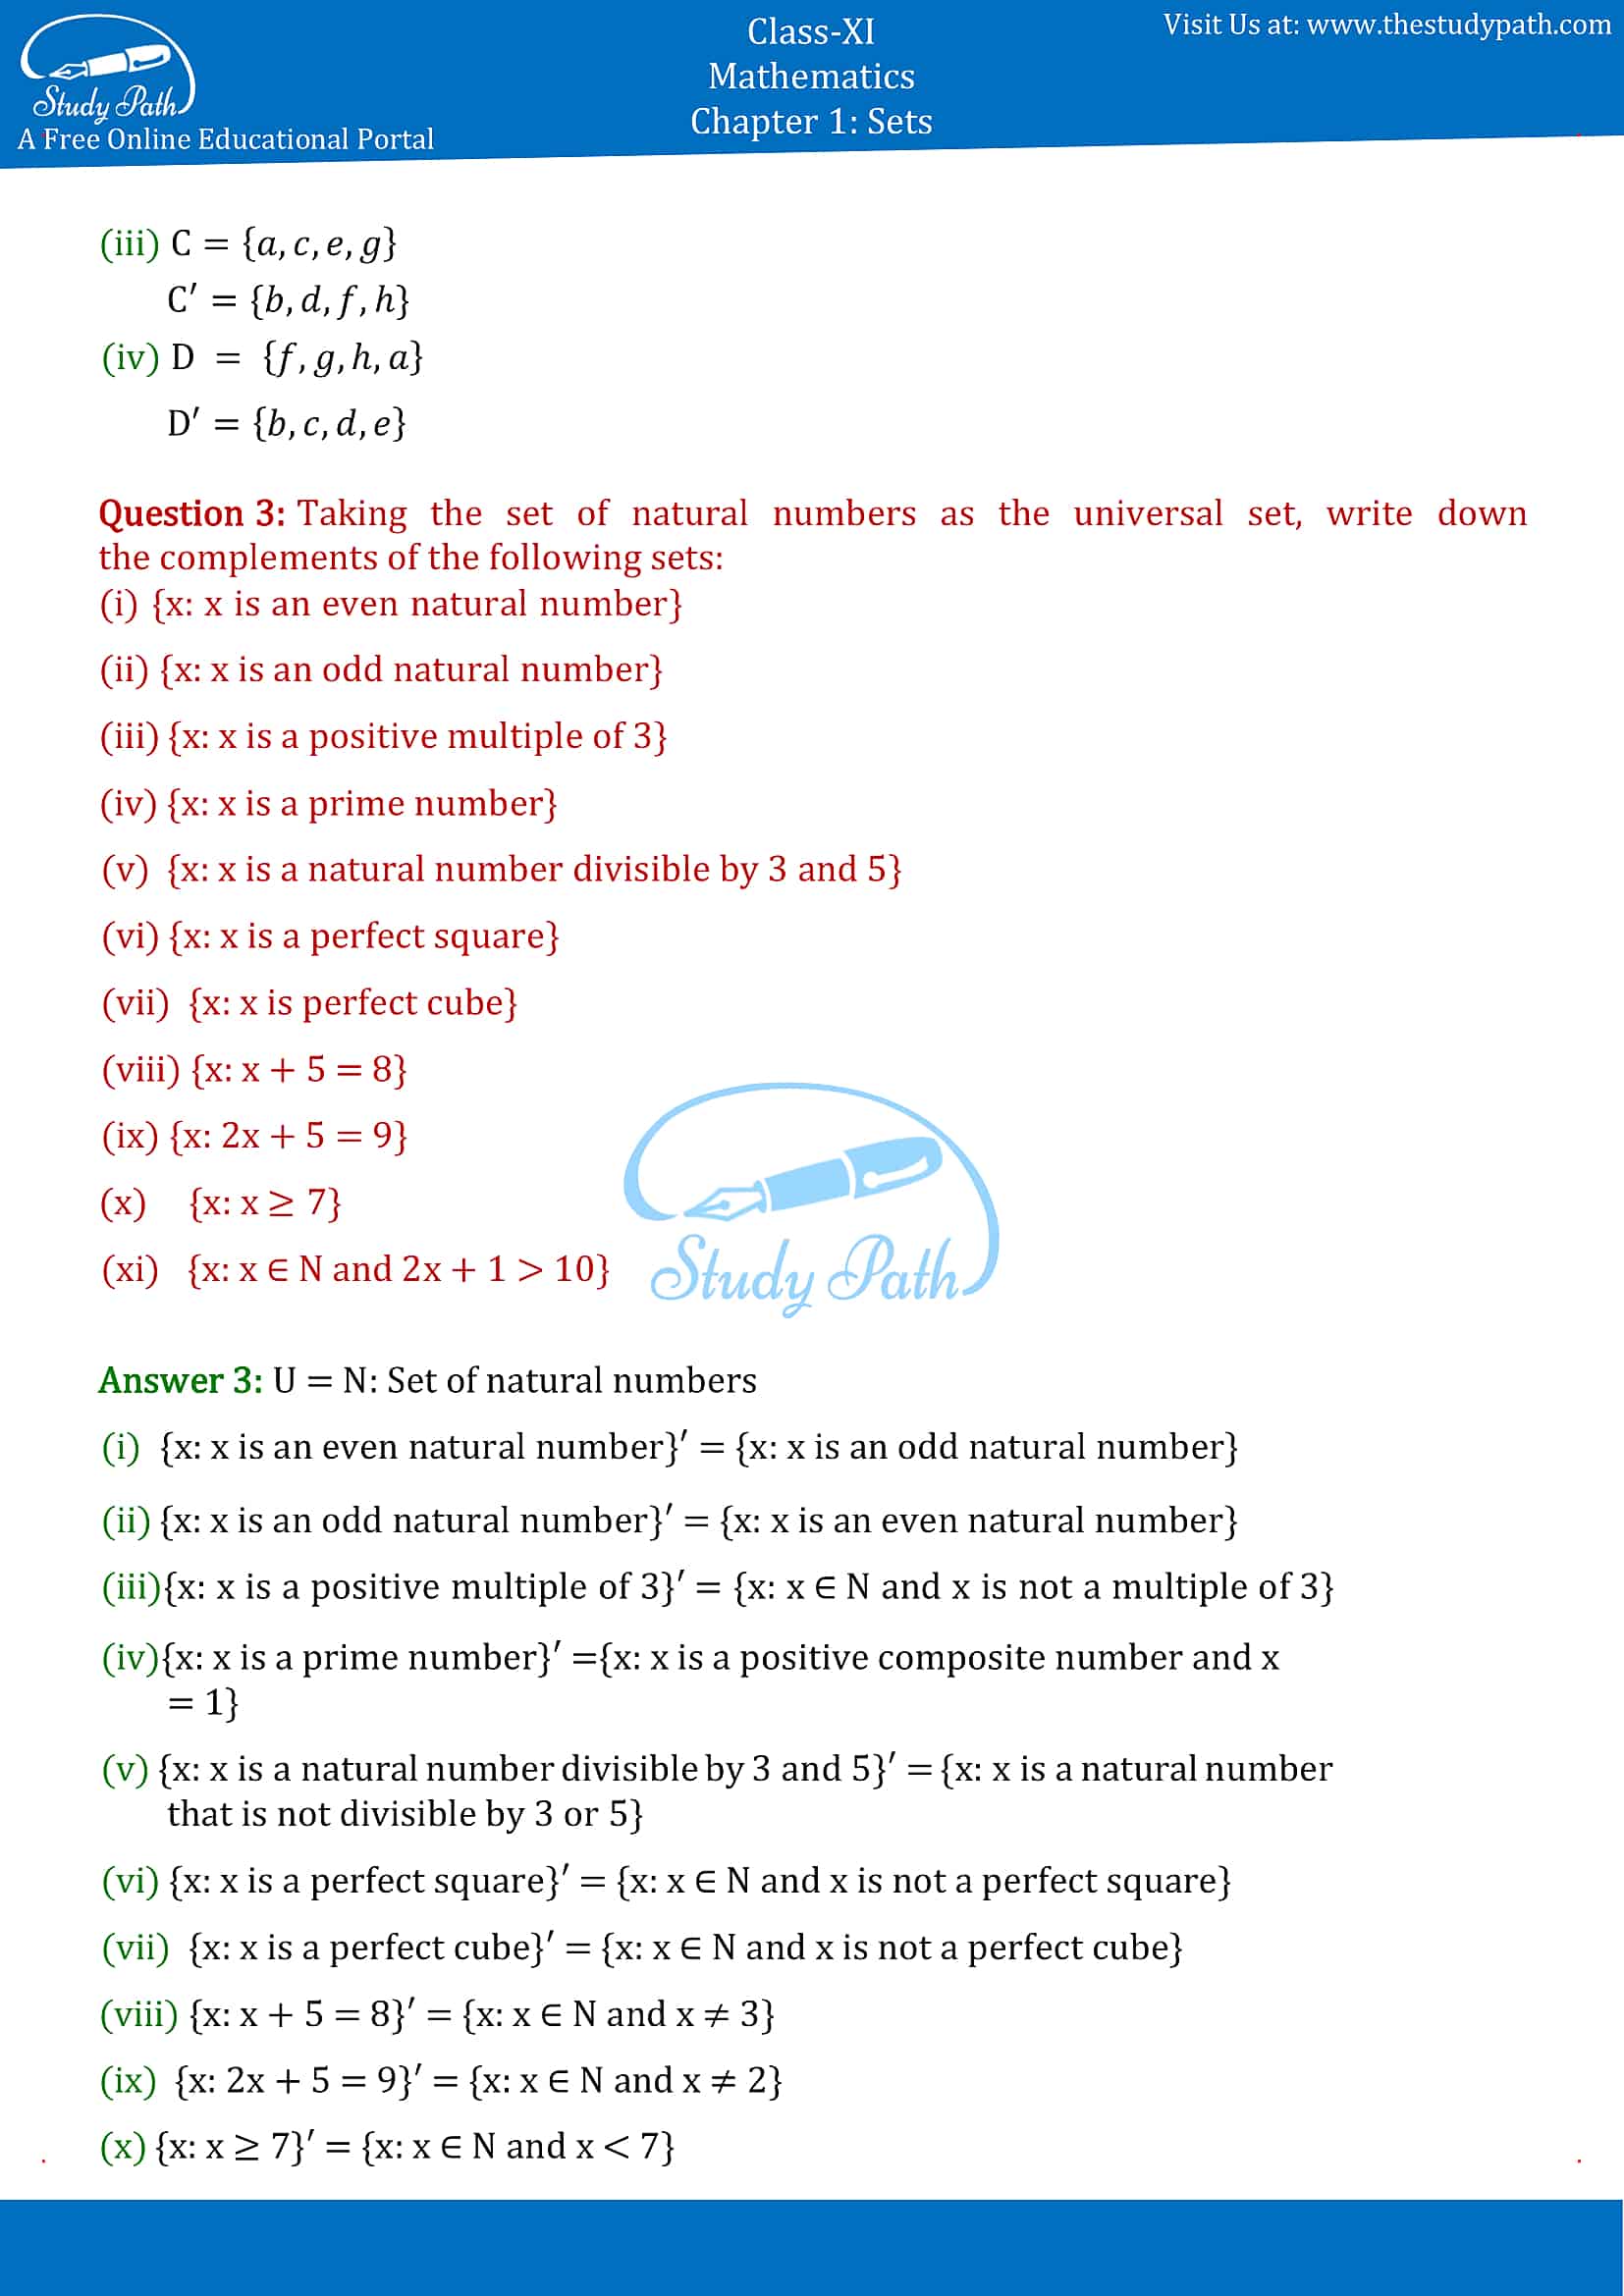 NCERT Solutions for Class 11 Maths chapter 1 sets Exercise 1.5